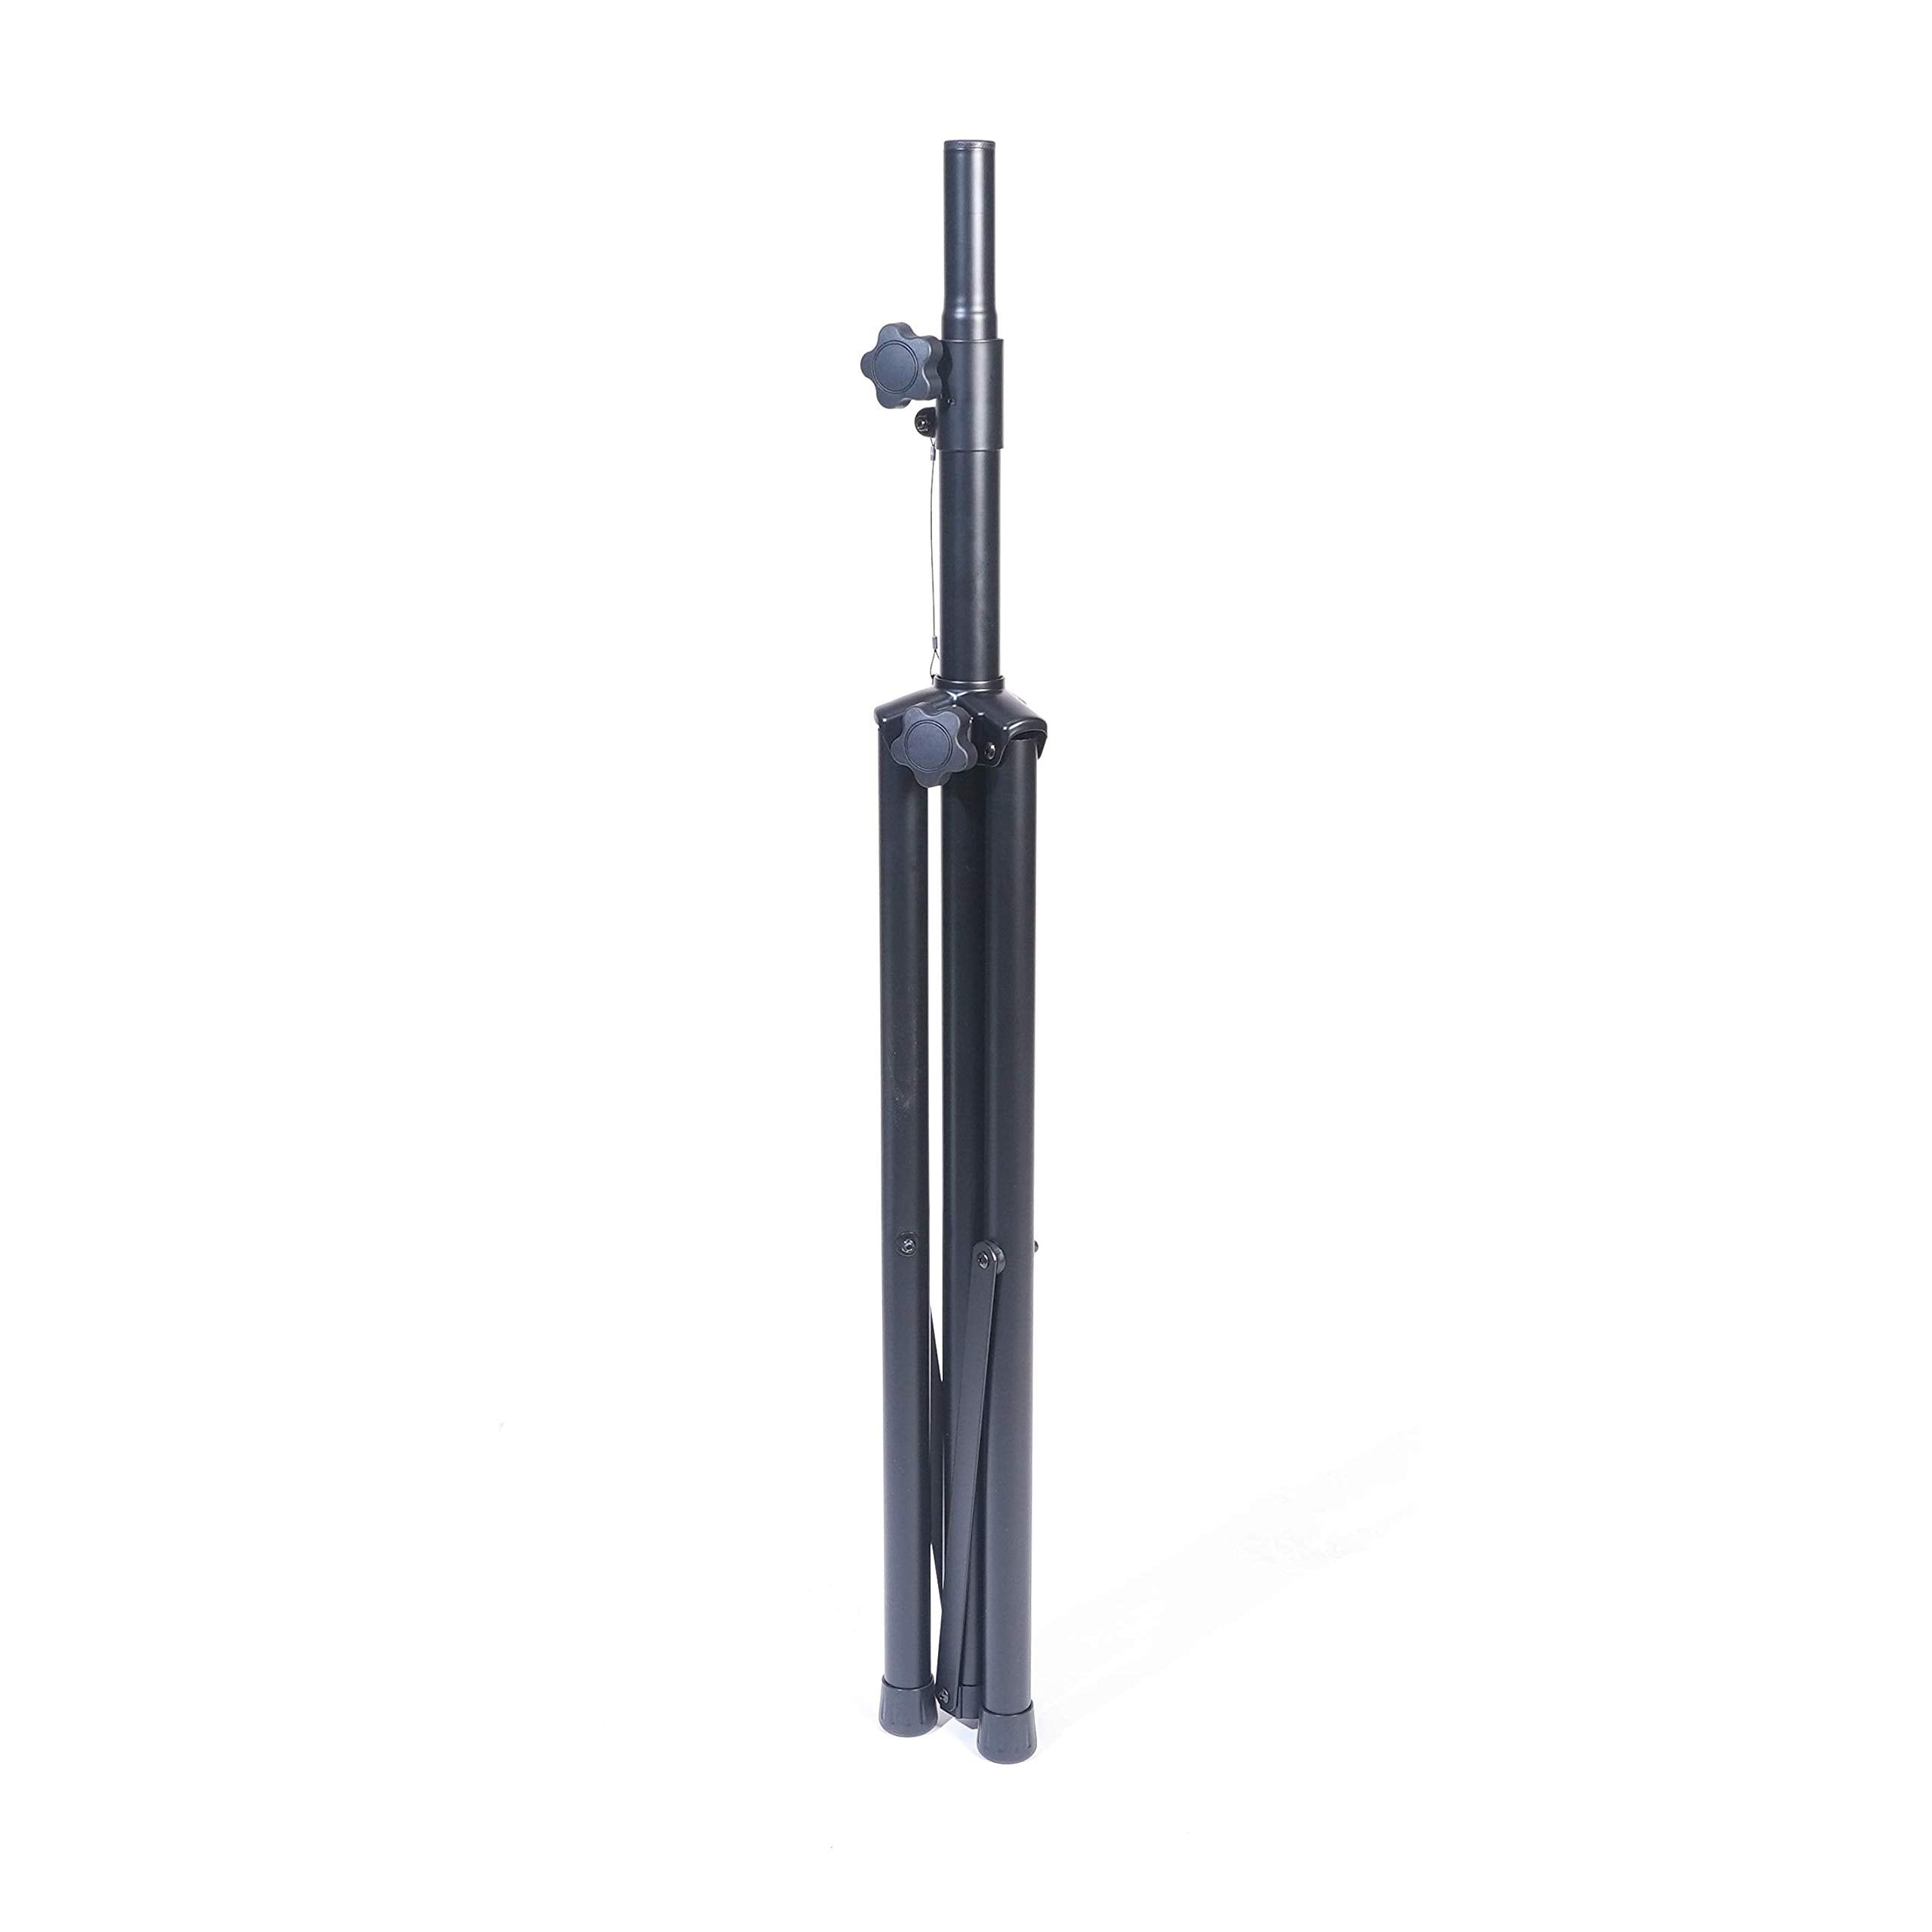 Universal Speaker Stand 6.65 ft • Adjustable Height from 46 in to 80 in • Rated at 150 pounds